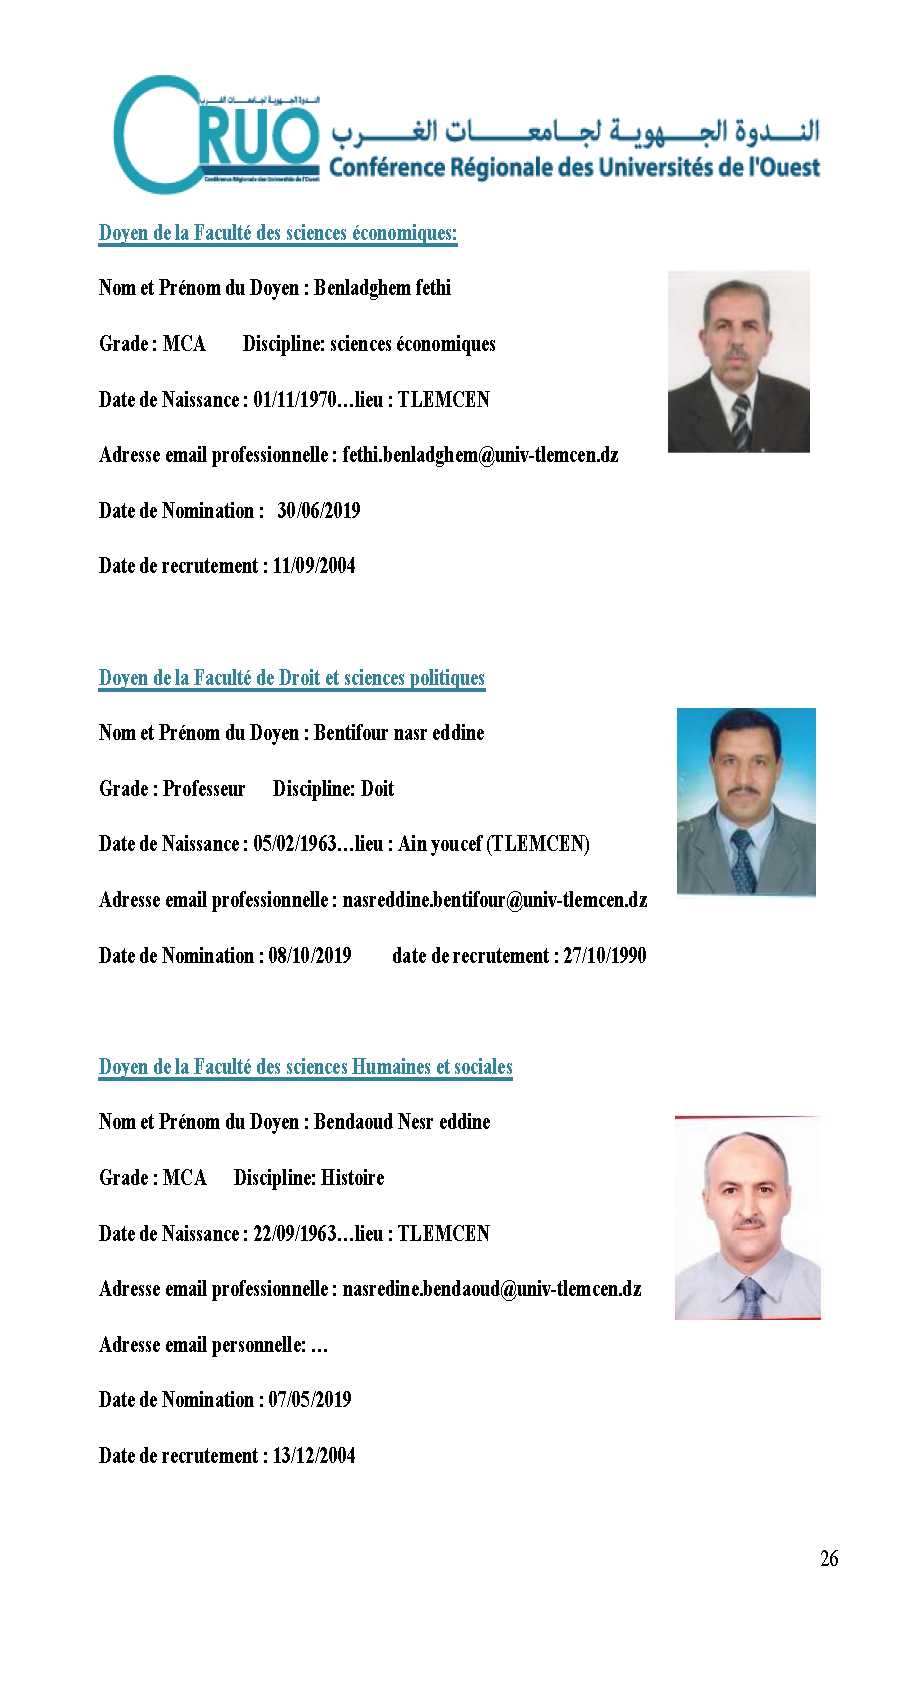 Annuaire_responsables_CRUO_Mai_2020_Page_27